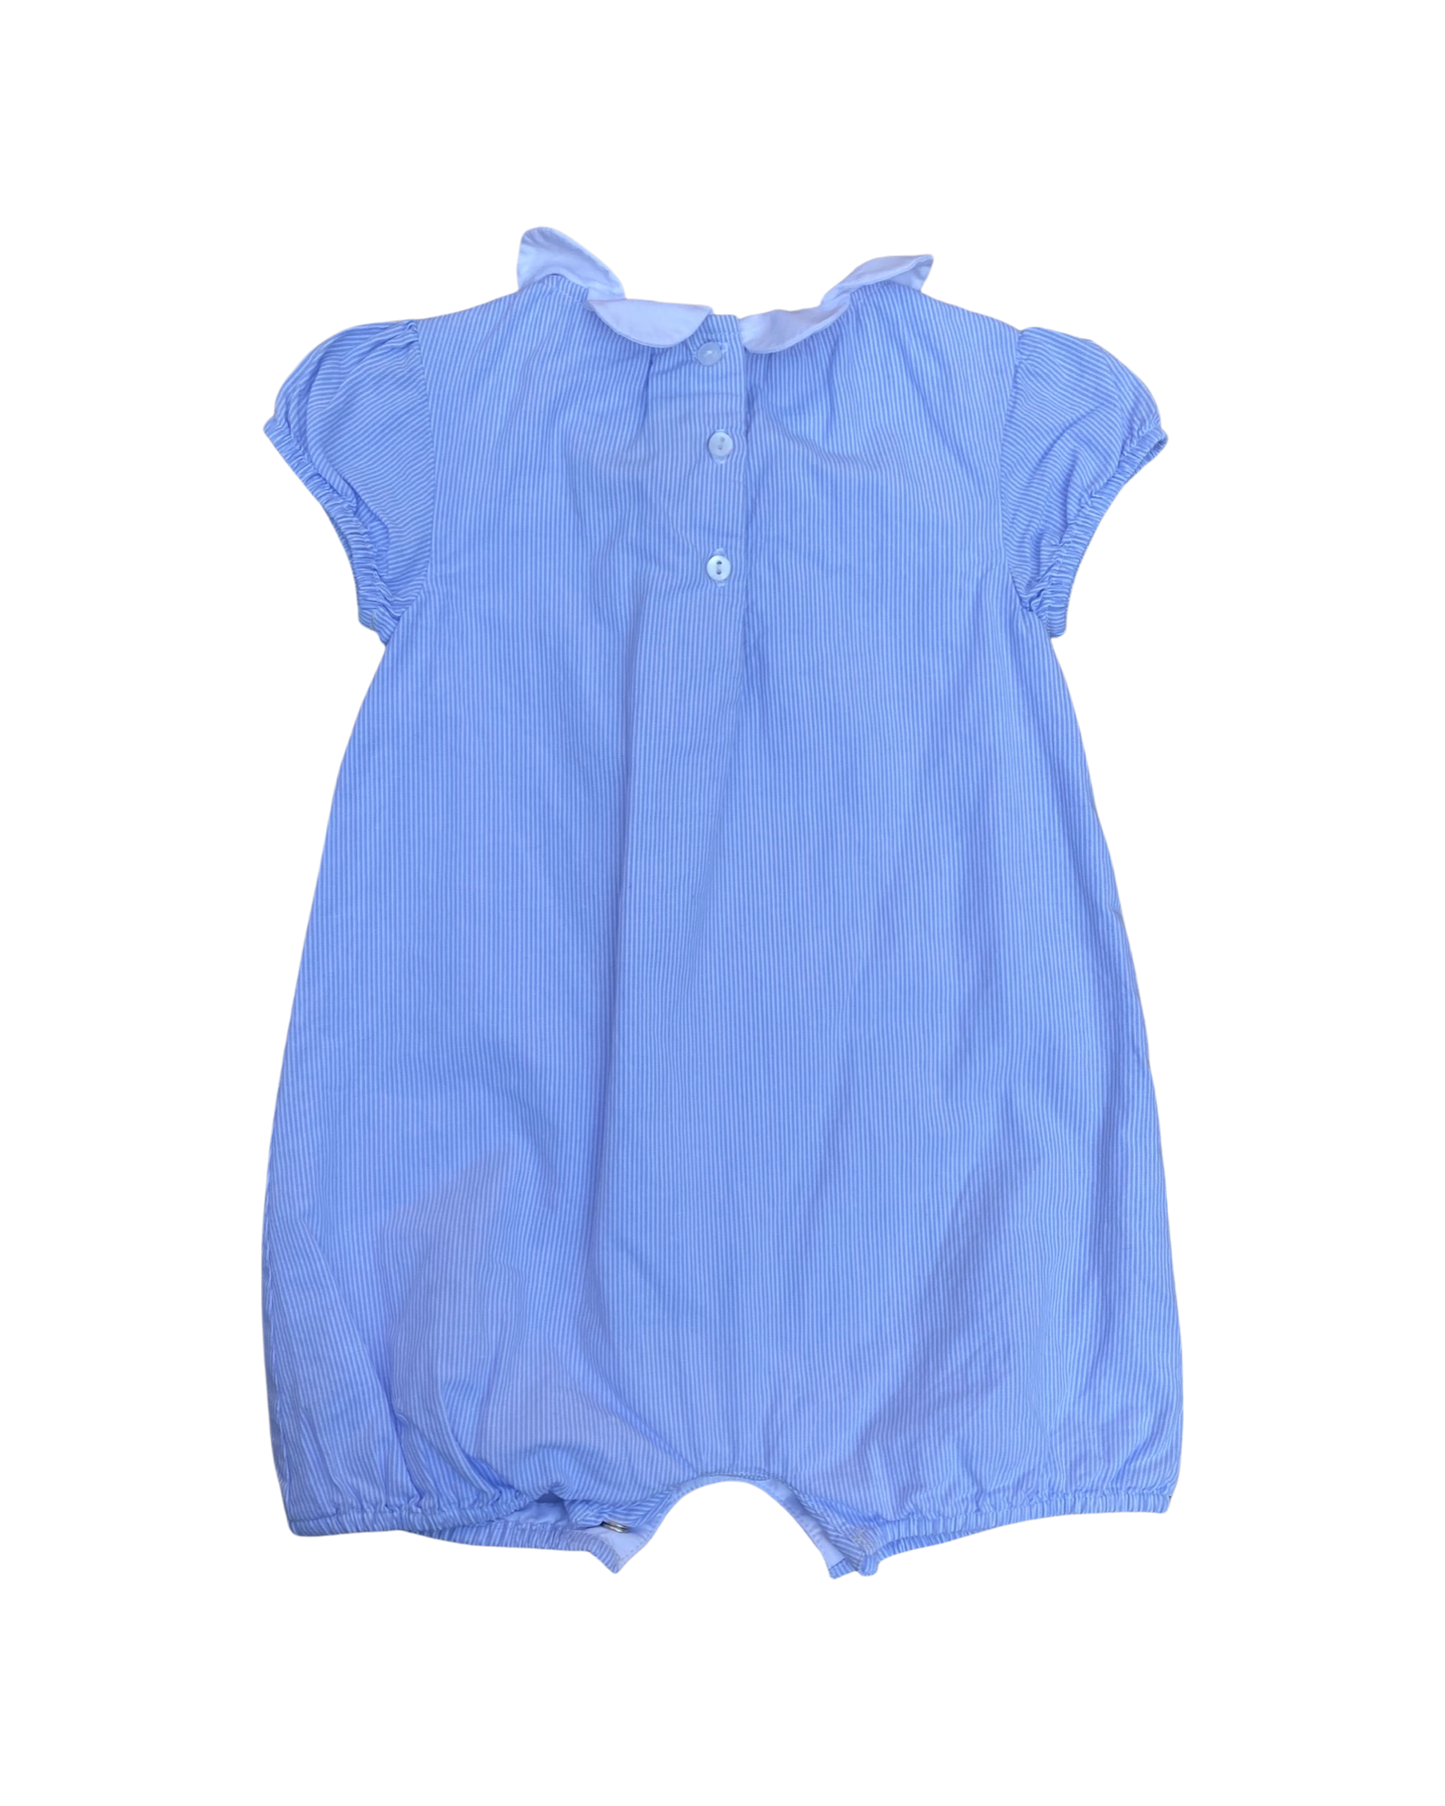 The Little White Company shortie one piece romper (9-12mths)